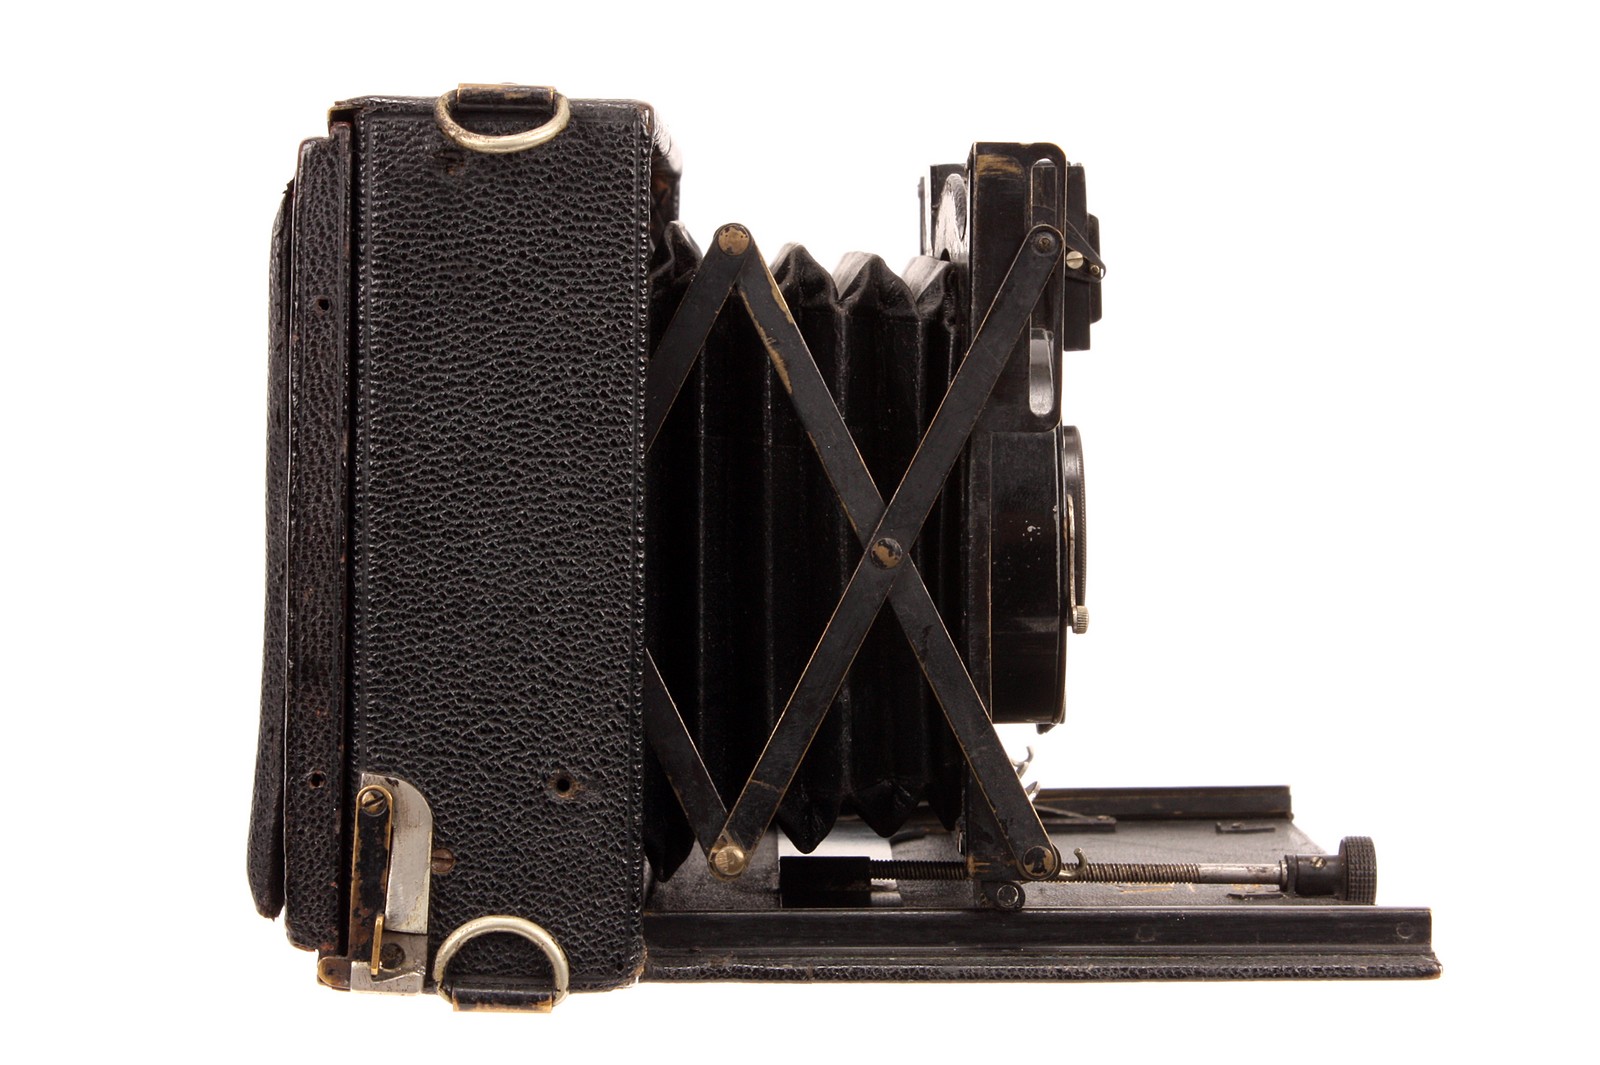 An Adams & Co. Vesta Stereo Camera, 10x15cm, serial no. 905, with Ross Zeiss Tessar f/6.3 112mm - Image 3 of 3